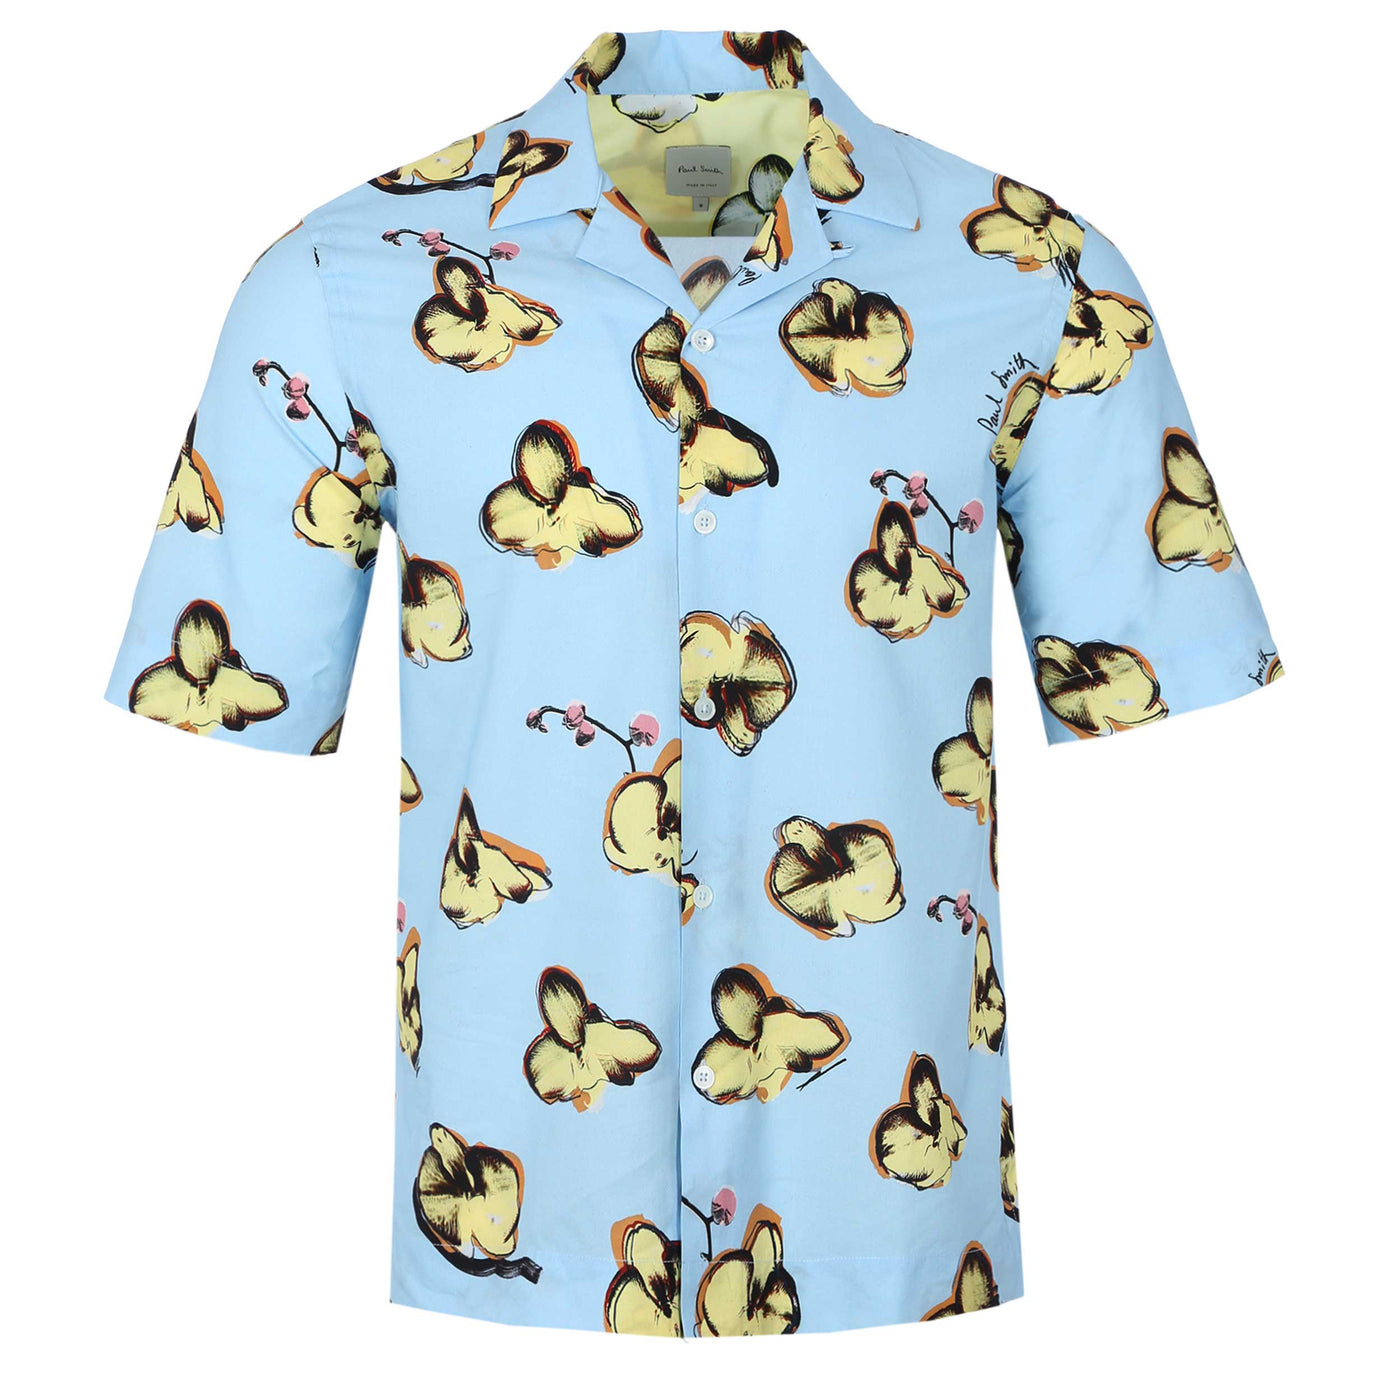 Paul Smith Orchid Reg Fit SS Shirt in Light Blue